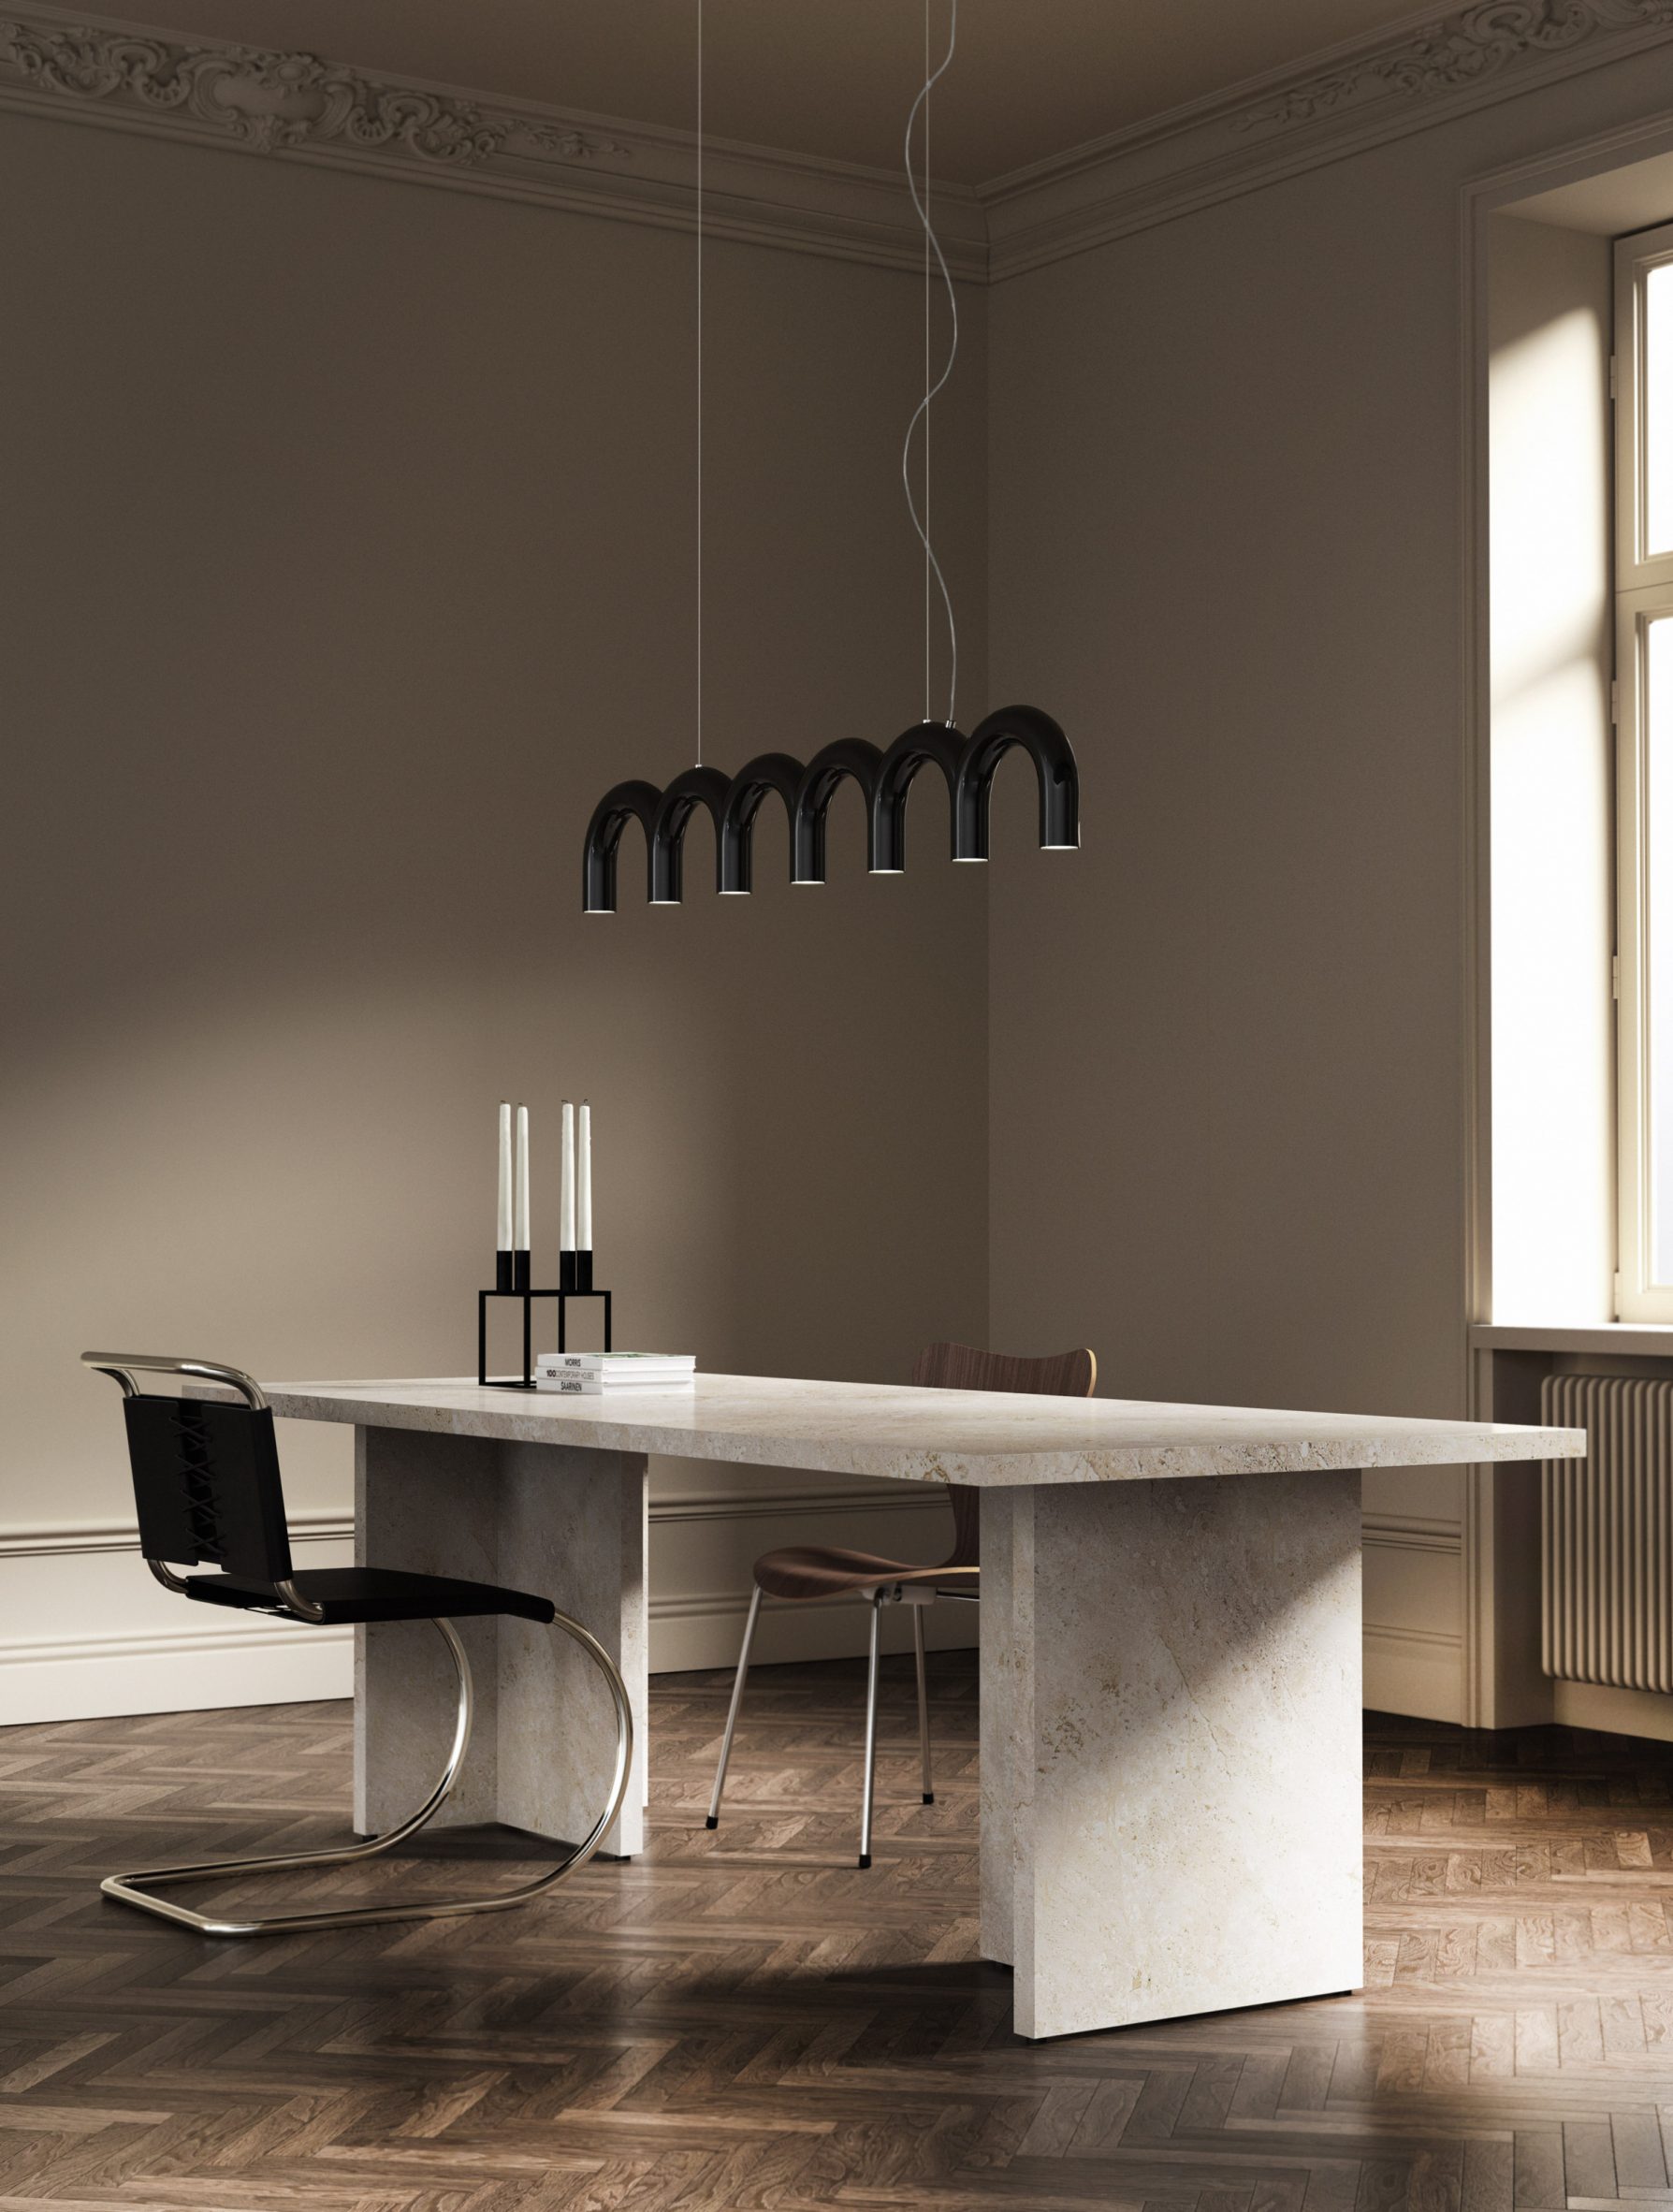 Arch pendant lamp by Johan Lindsten and Markus Johansson for Oblure